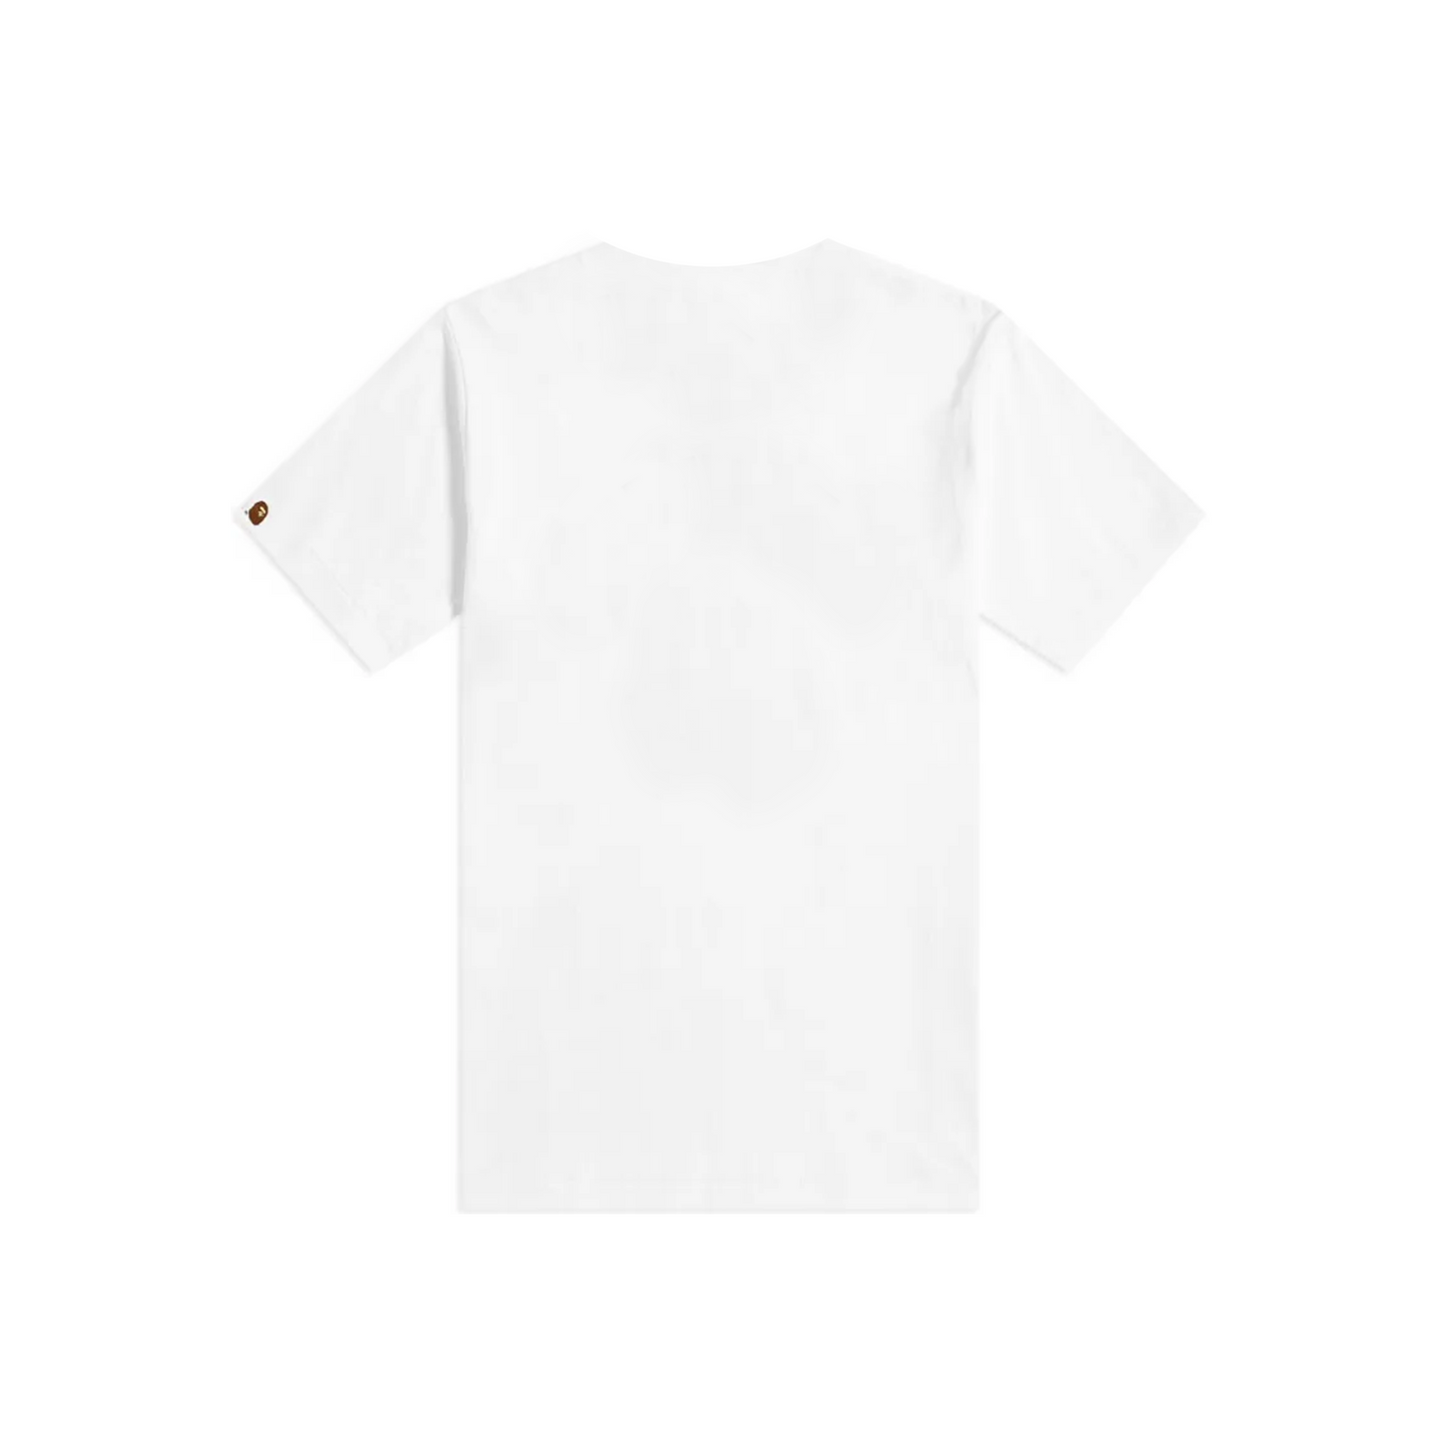 BAPE Multi Camo Japanese Letters Relaxed Fit Tee White